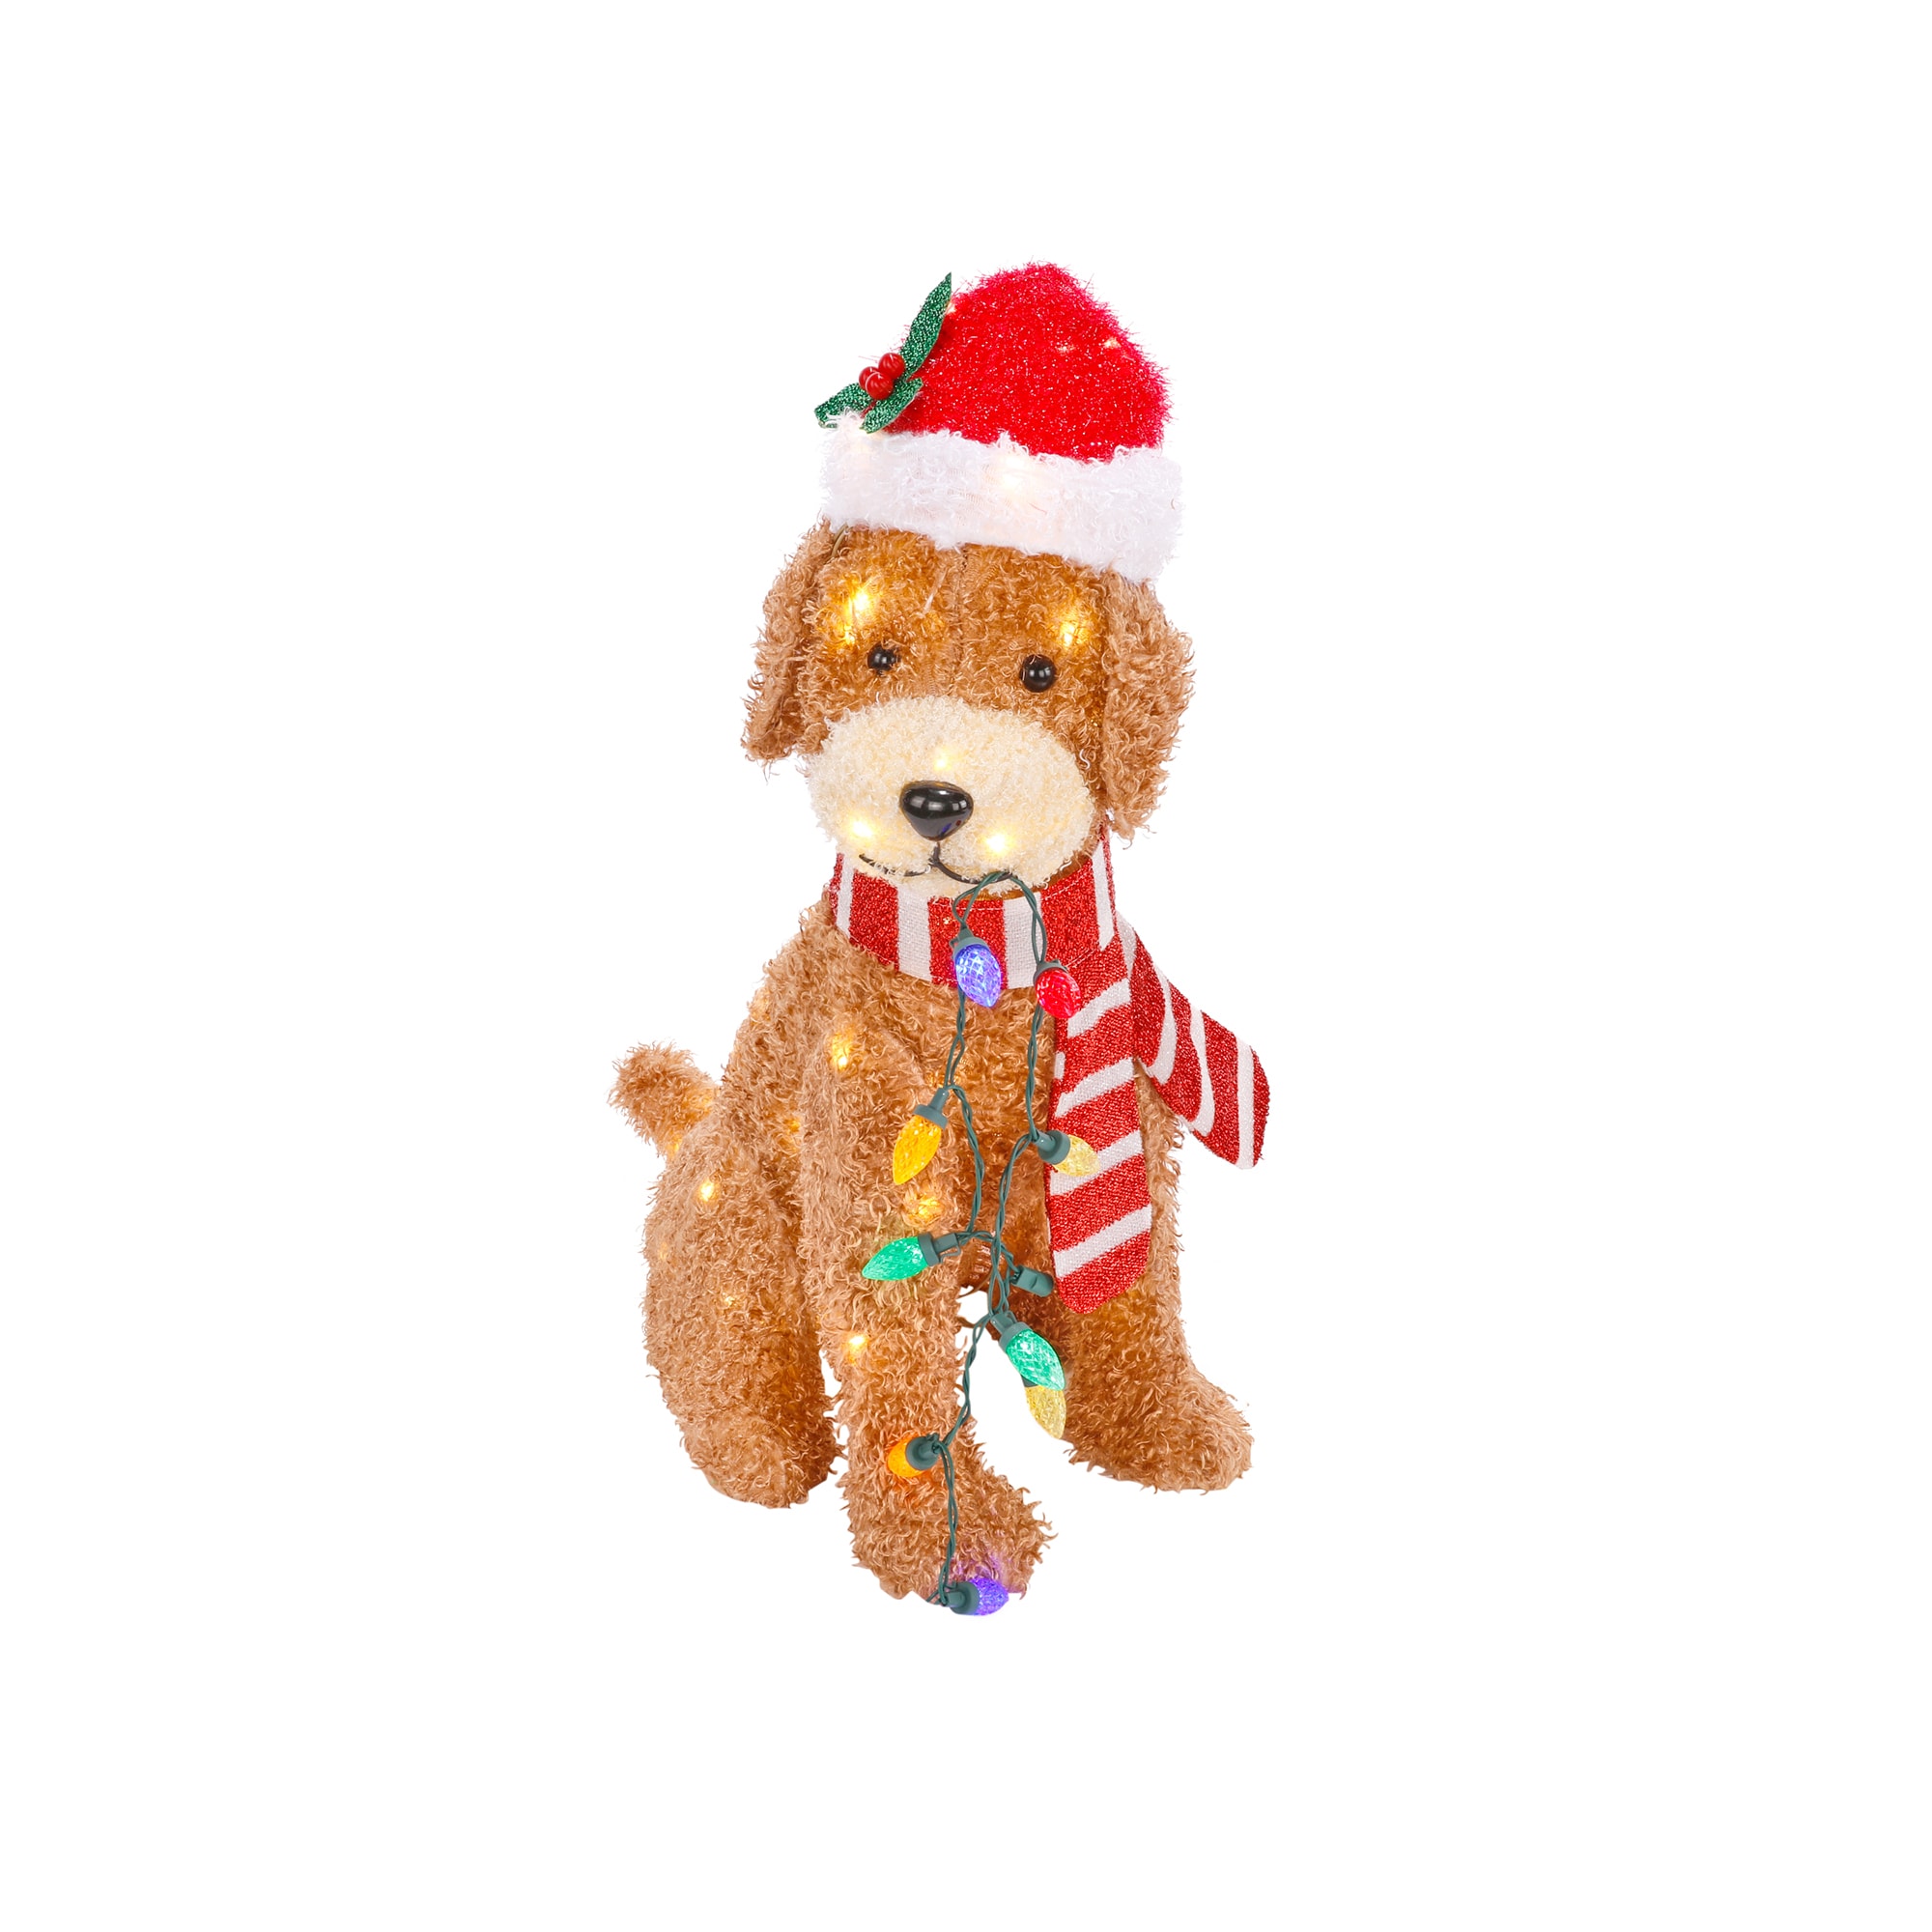 mttdxnh plush stuffed animal puppy dog - adorable goldendoodle for gifts, emotional  support, toy - golden brown poodle - ultra soft 